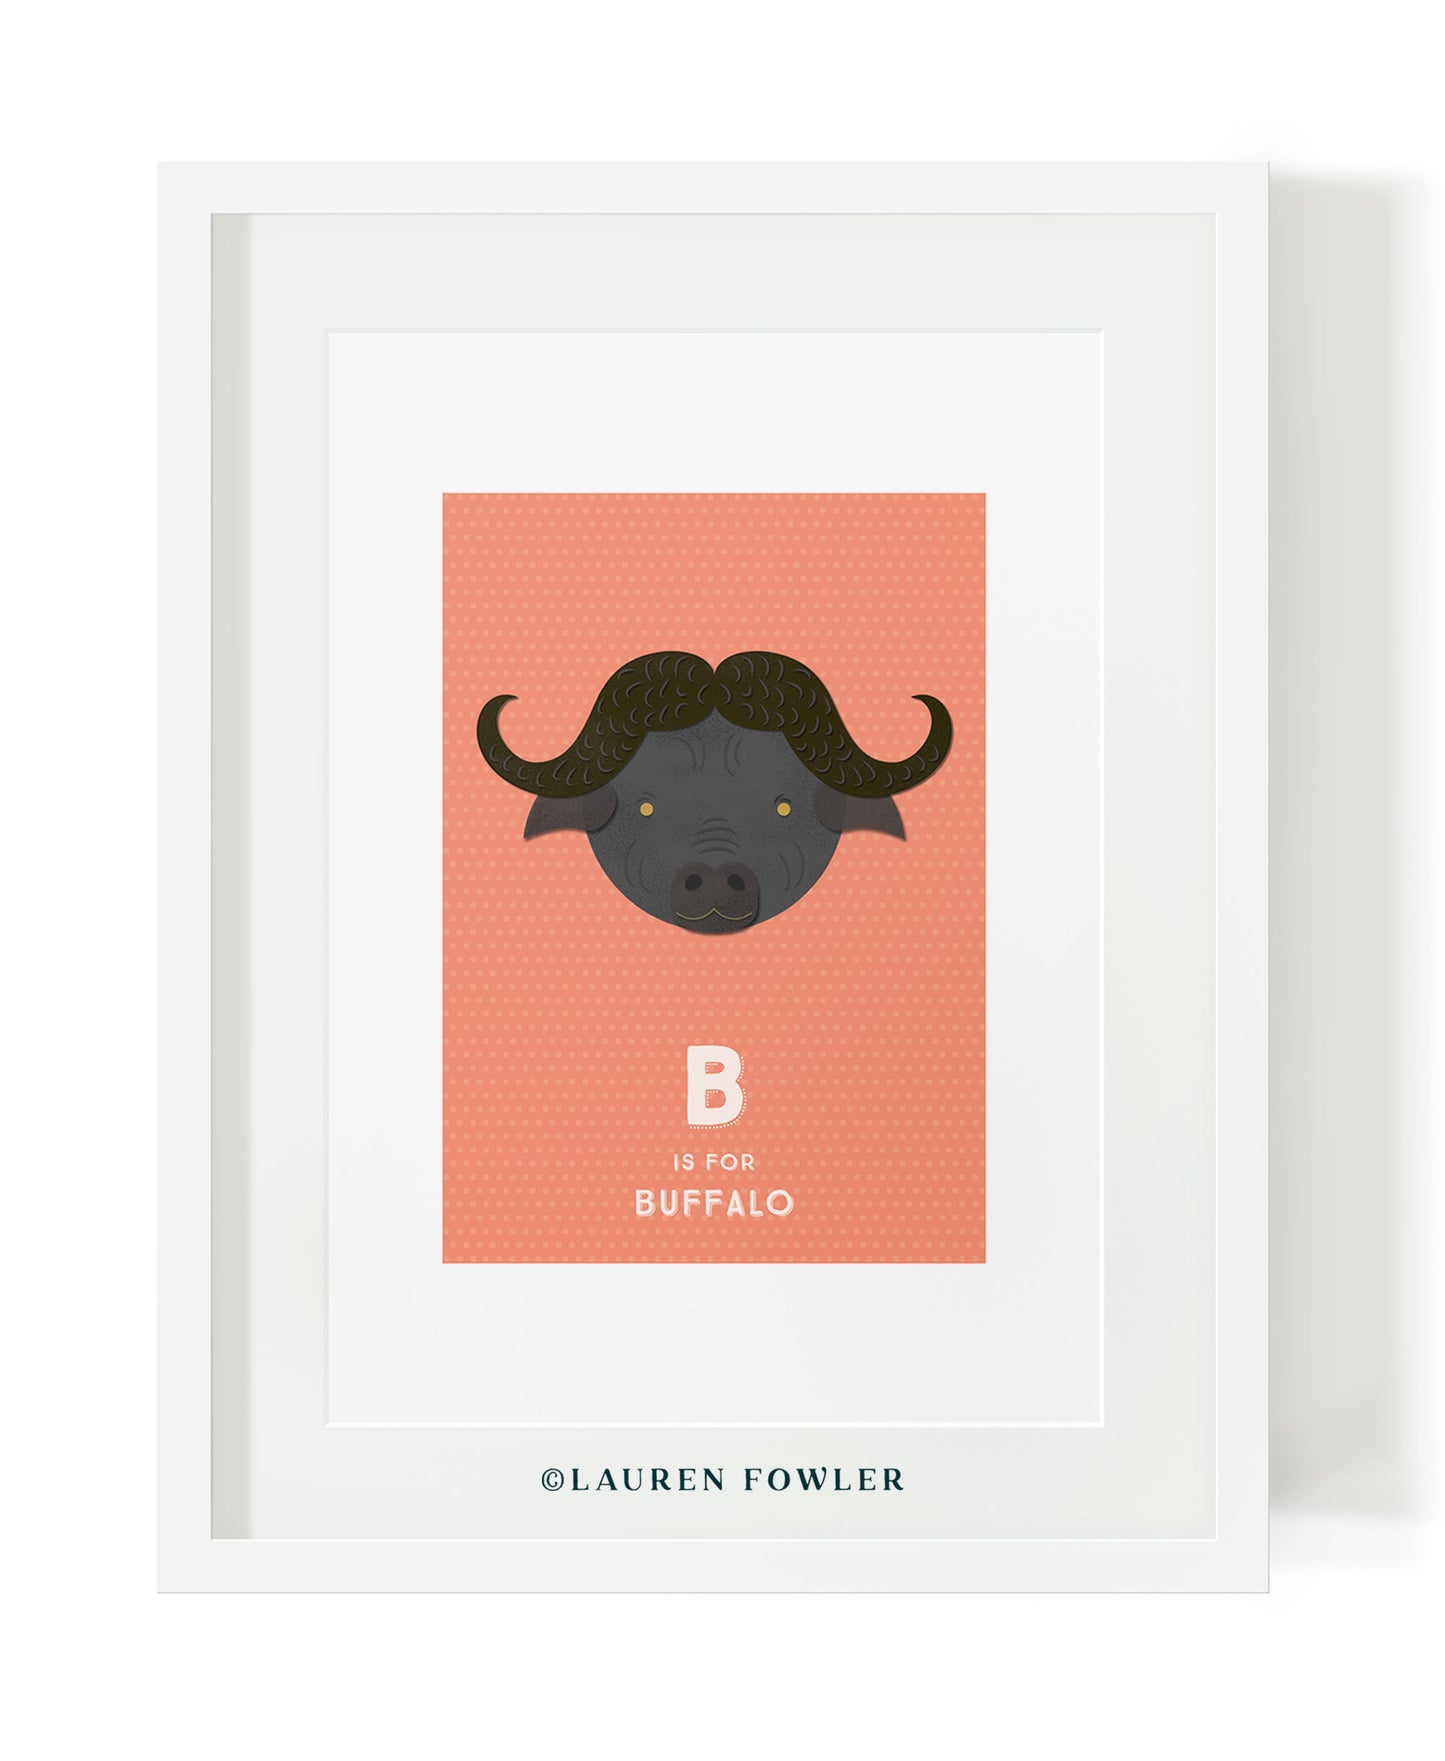 South African Big Five Buffalo illustrated artwork by Lauren Fowler